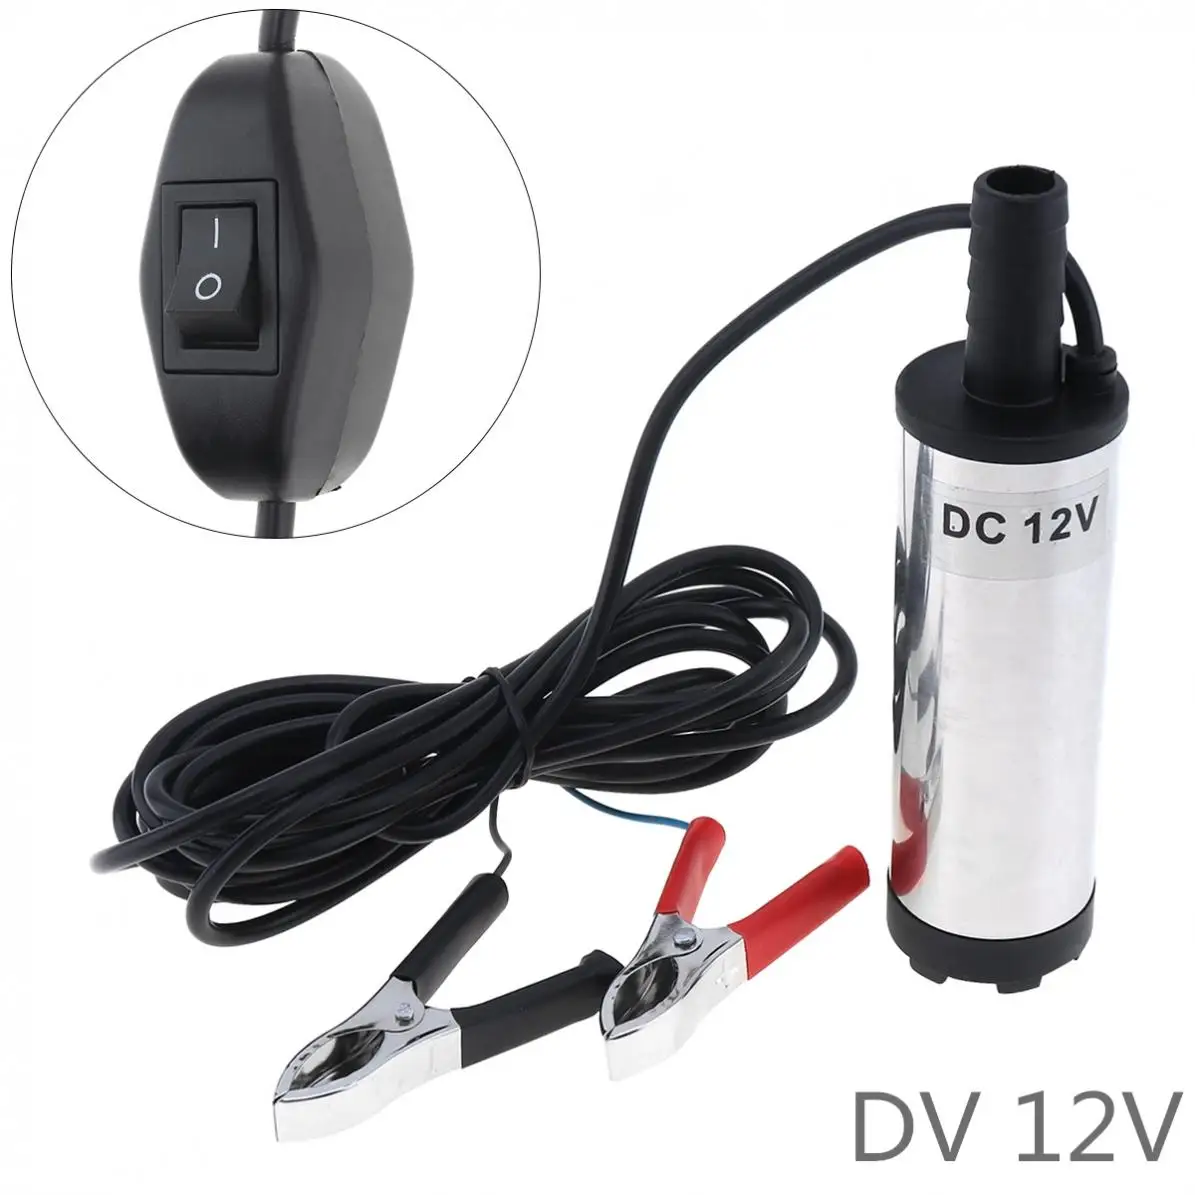 

DC 12V 38MM Silver Portable Stainless Steel Car Electric Submersible Pump Fuel Water Oil Barrel Pump with 2 Alligator Clips